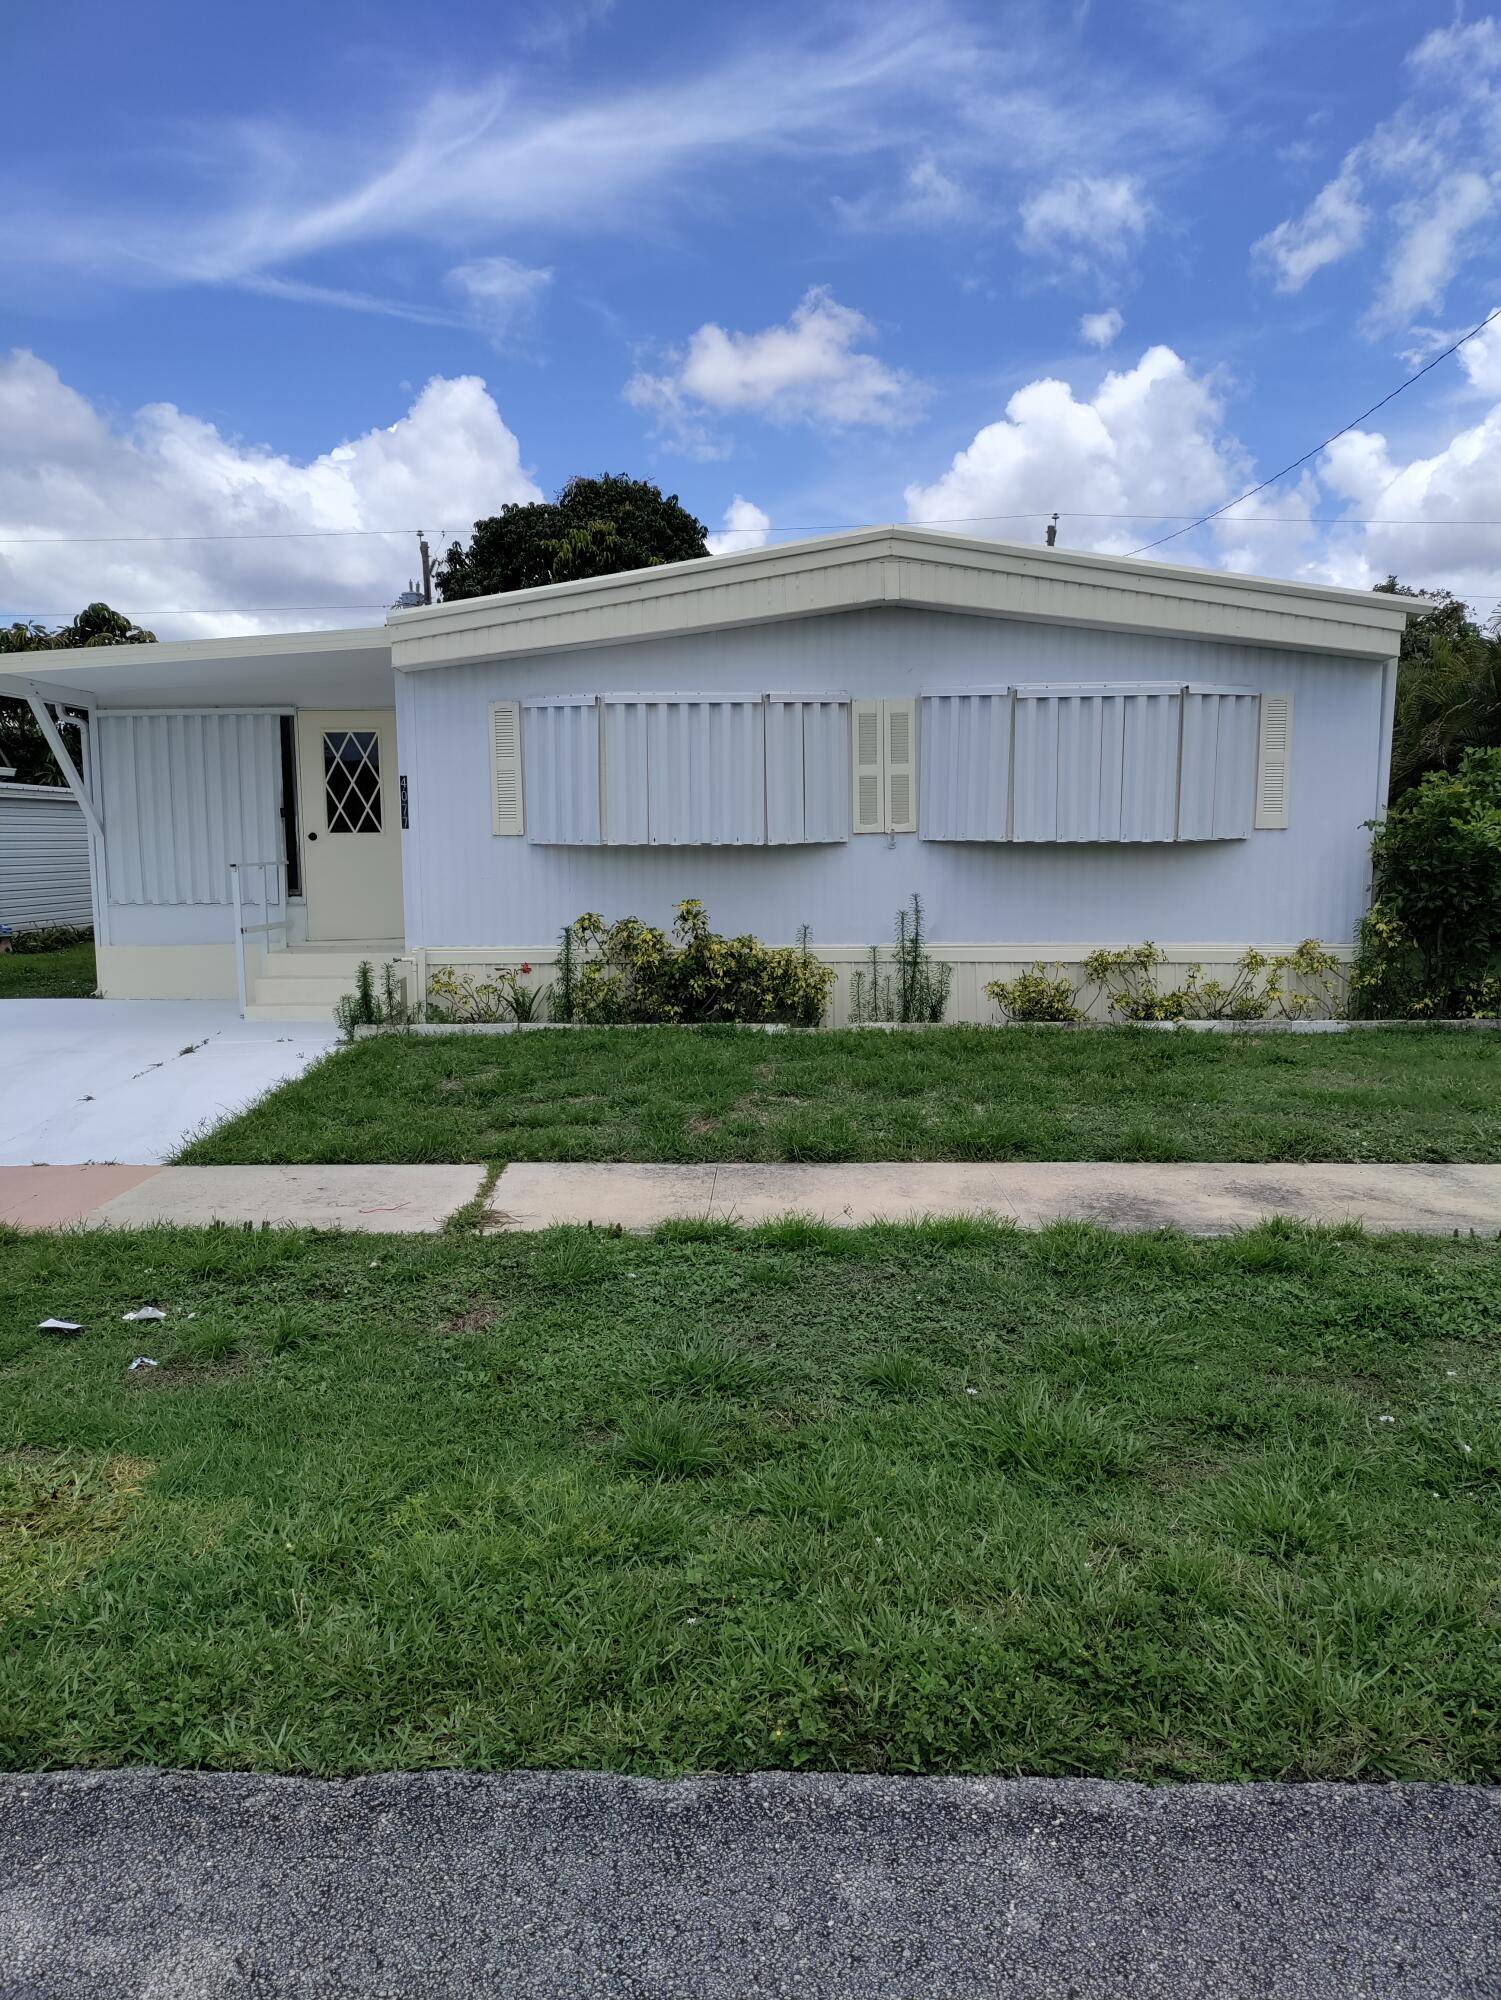 When you buy in Tropical Breeze the deeded lot come with the mobile home.